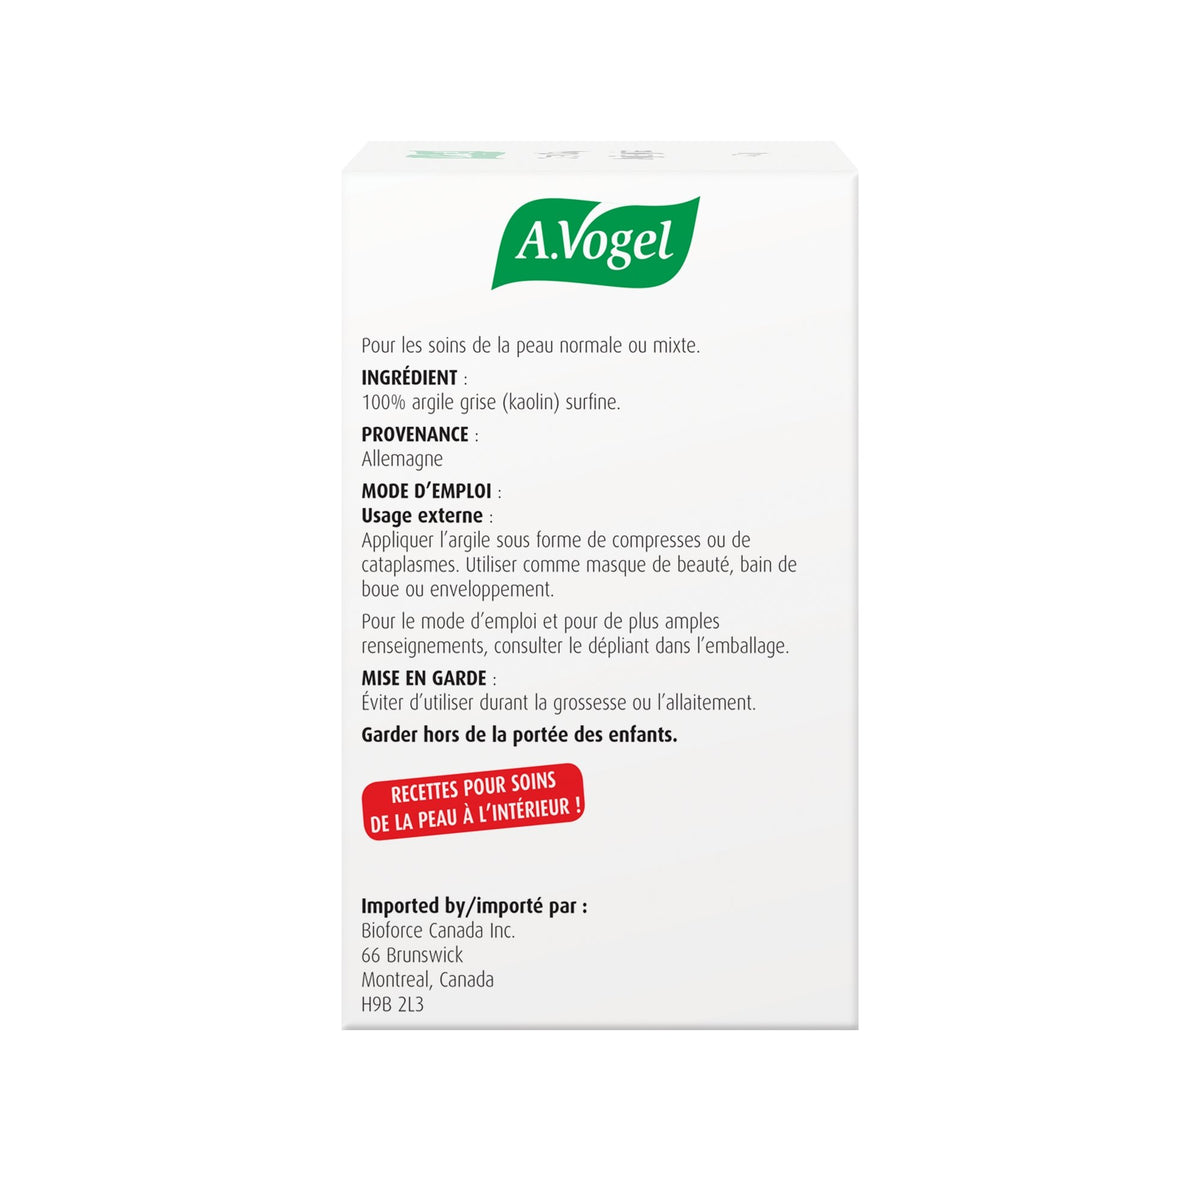 Green Clay - Used for clay mask, green clay is ideal for oily and problem skin - A.Vogel Canada